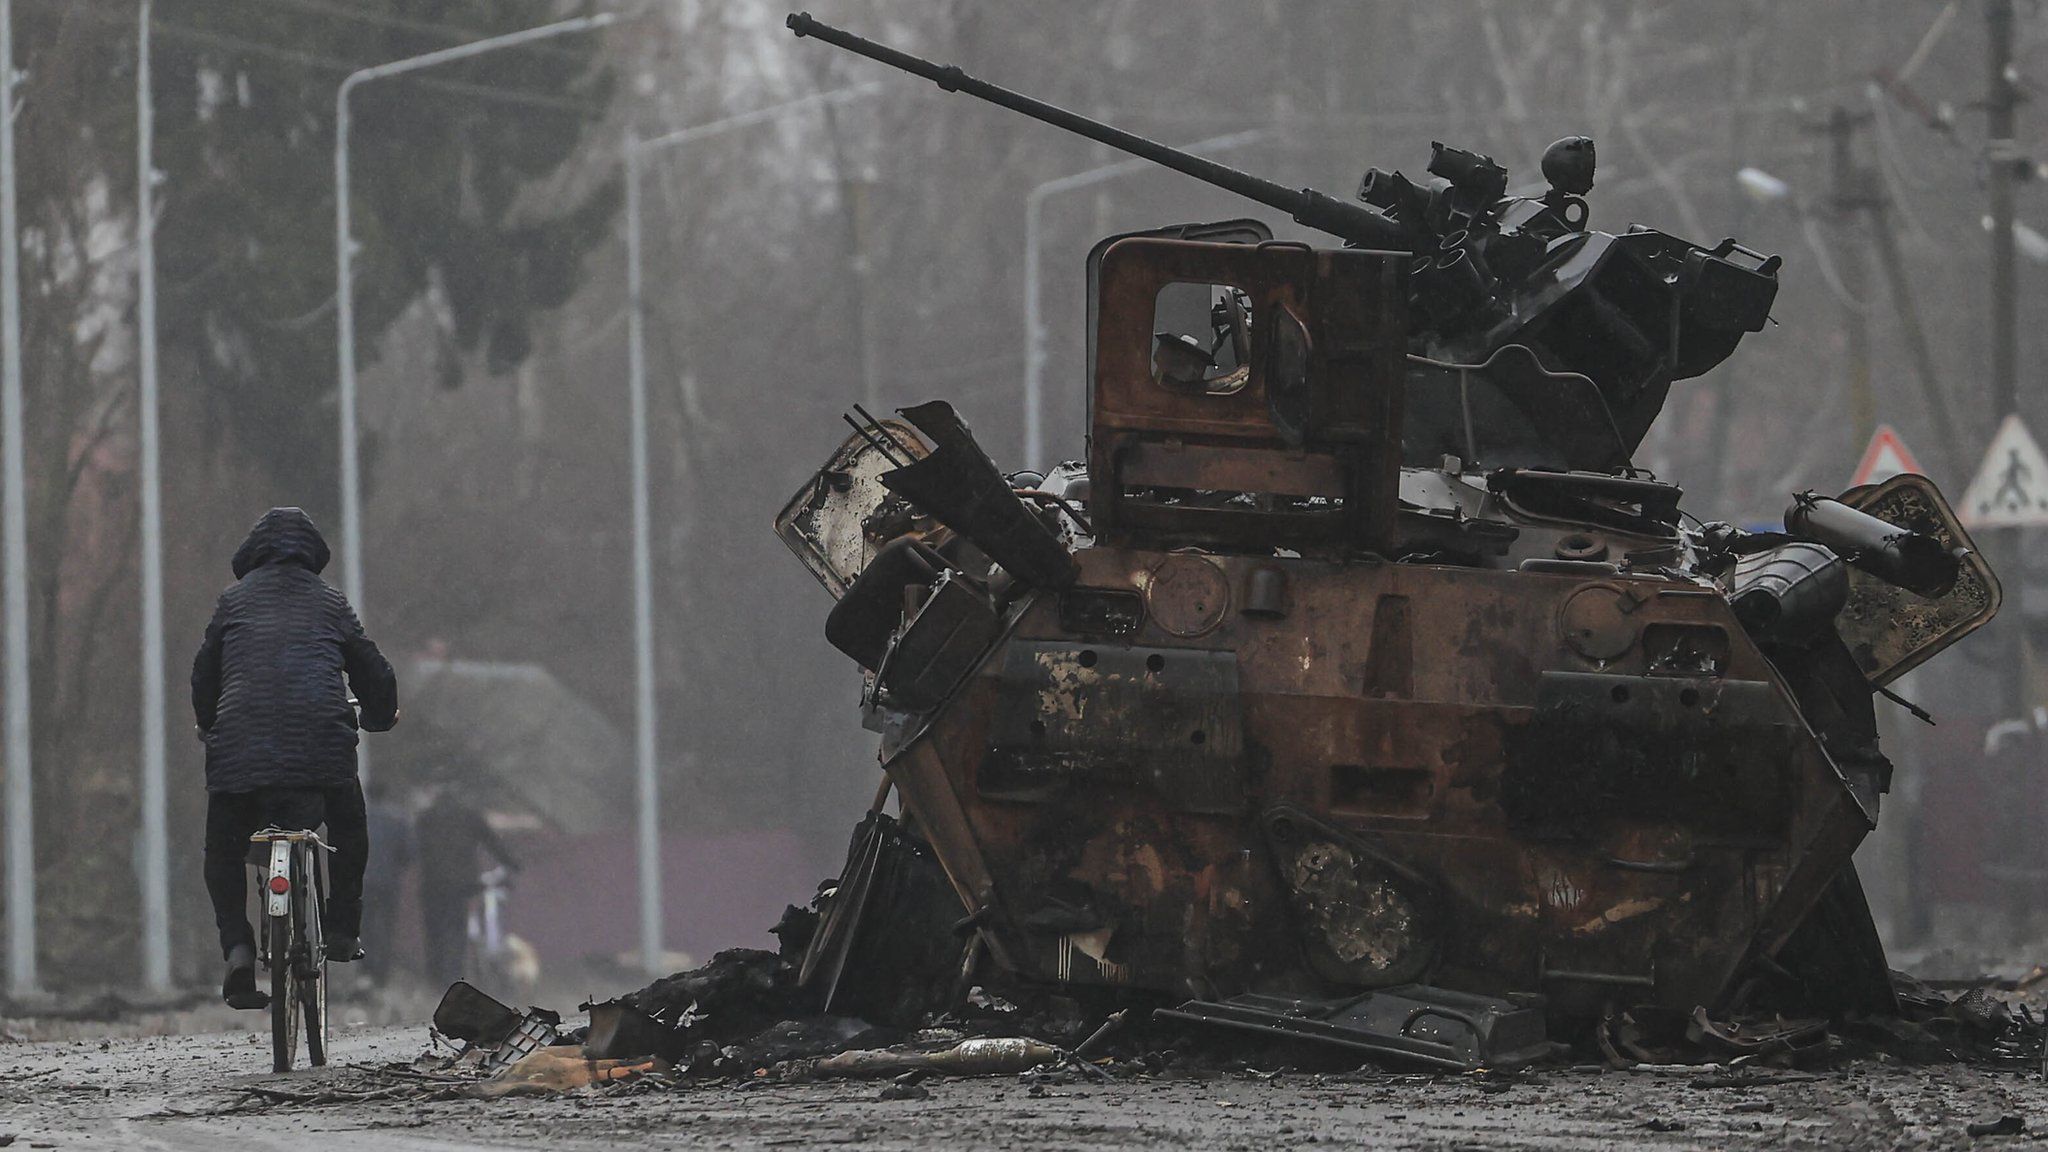 Image shows burnt out tank in Chernihiv